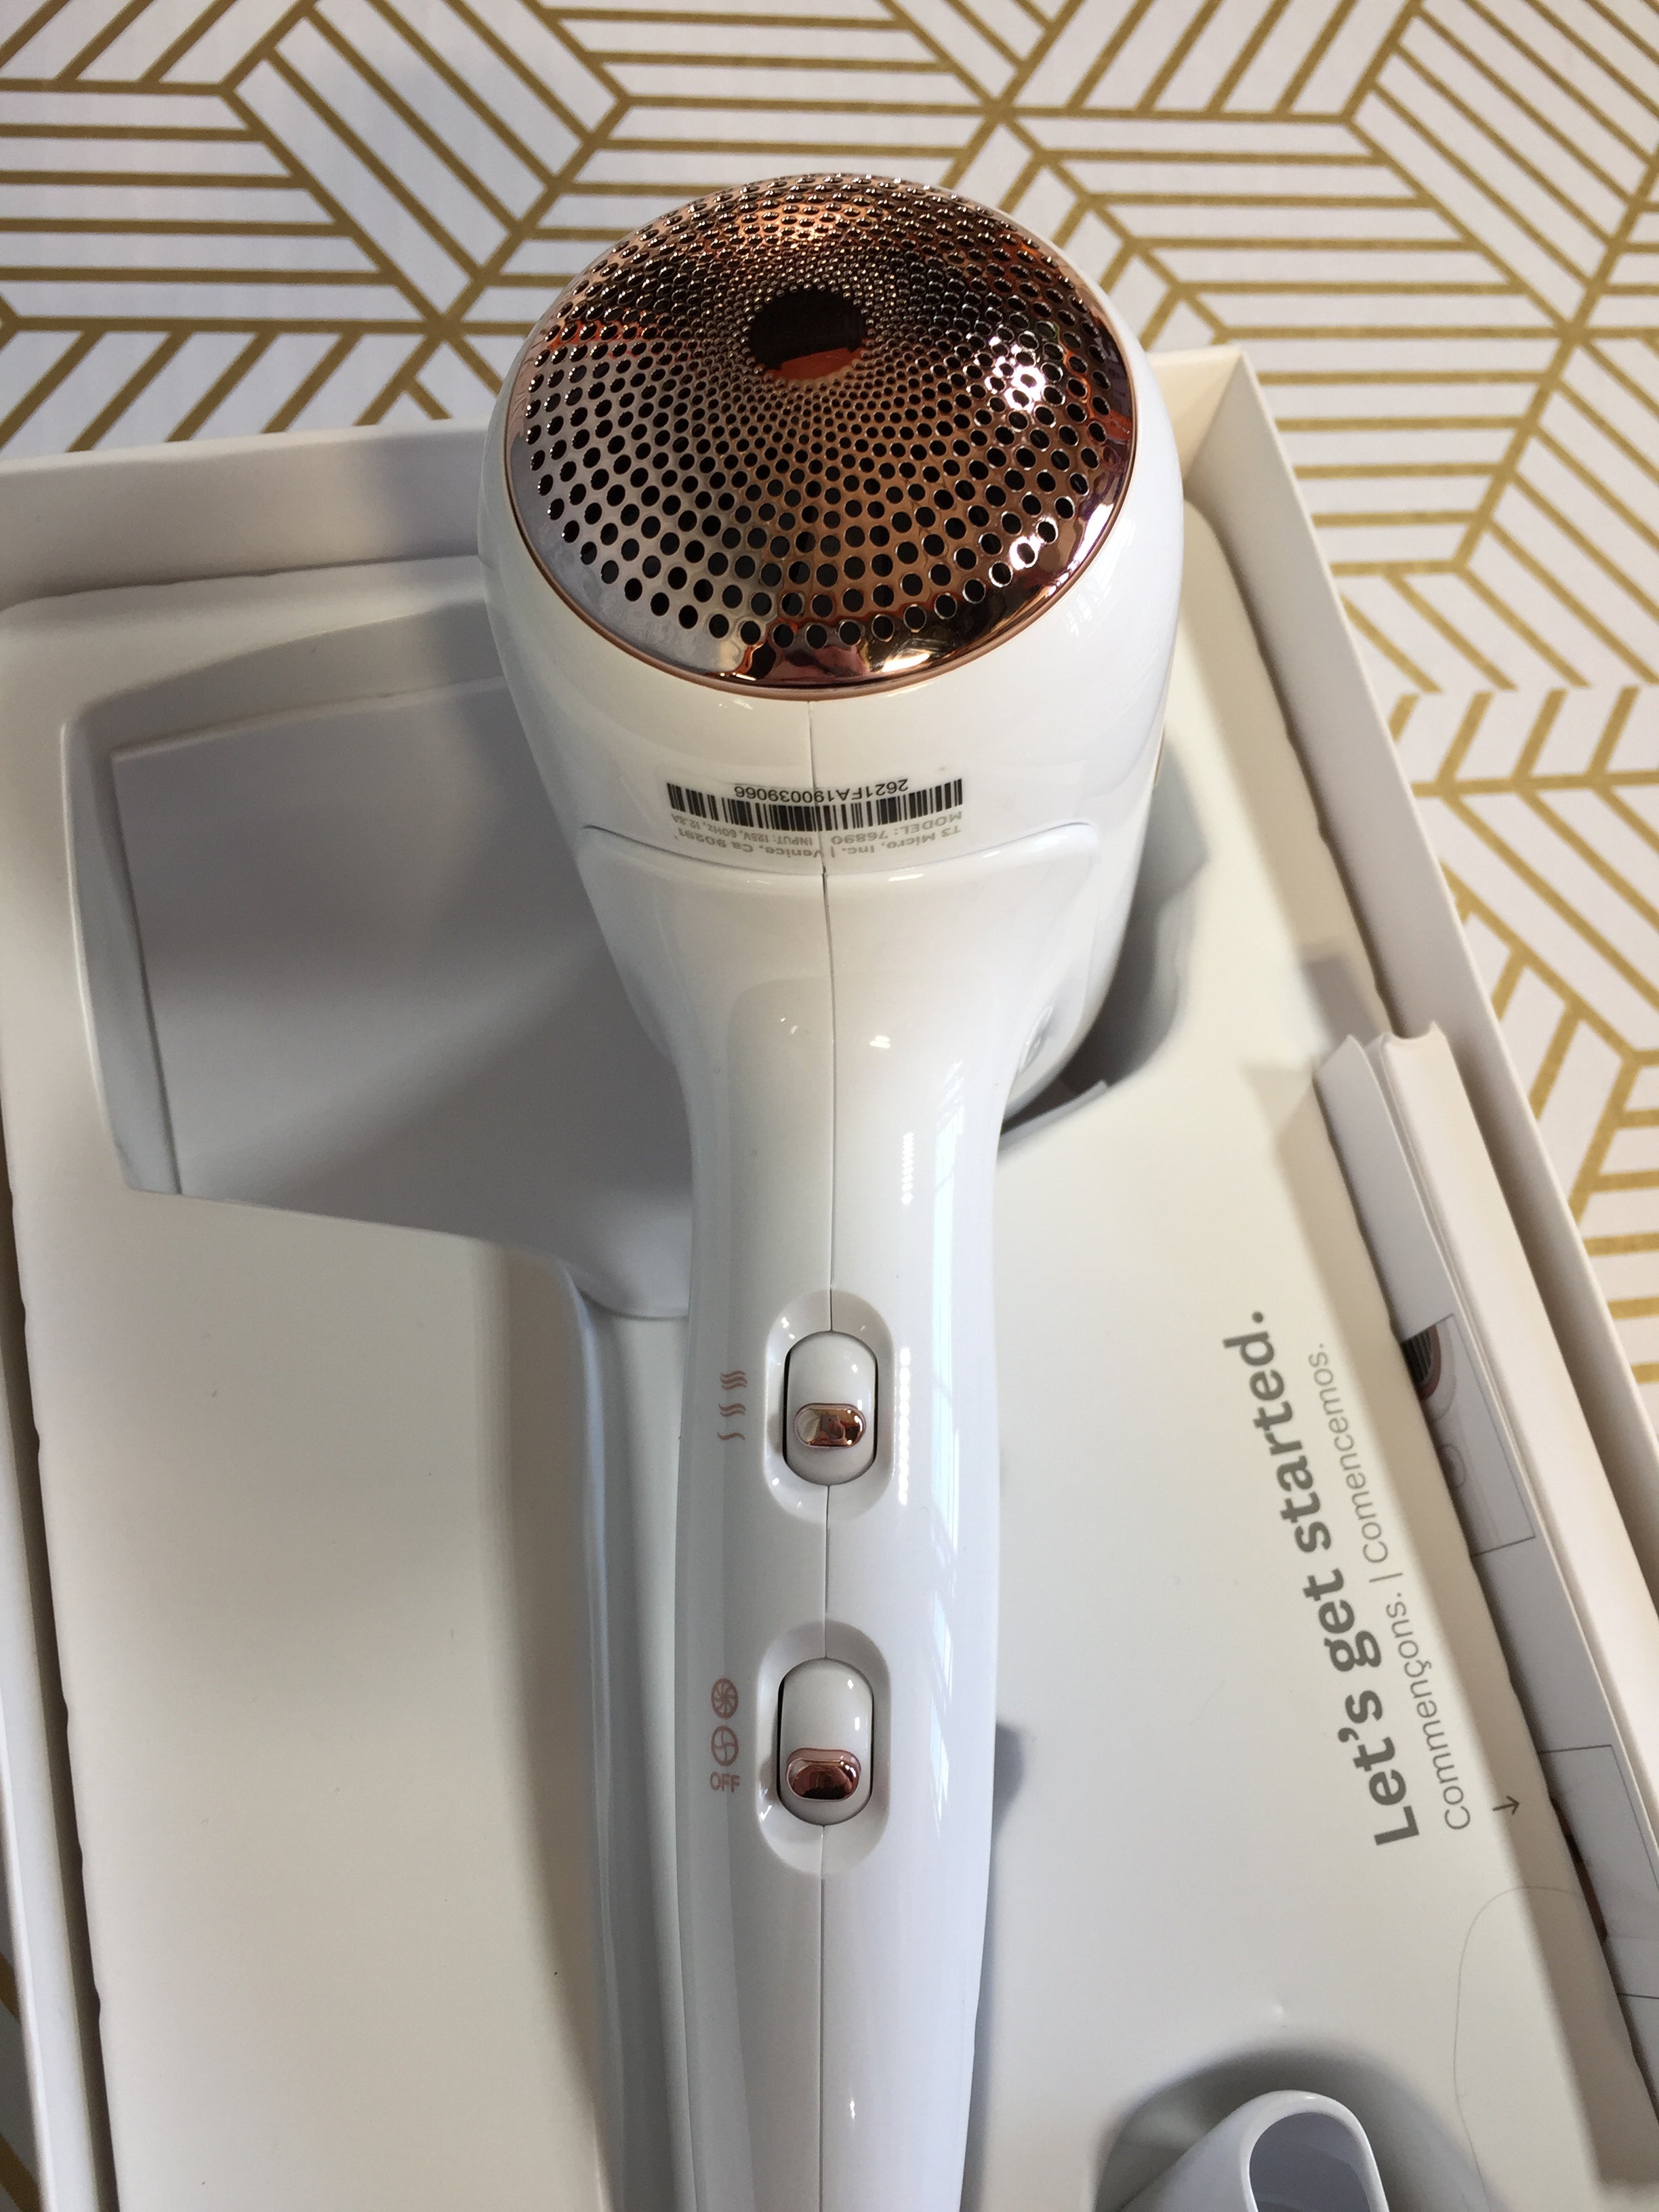 T3 Micro T3 Fit Ionic Compact Hair Dryer with IonAir Technology - OPEN BOX (7677037805806)